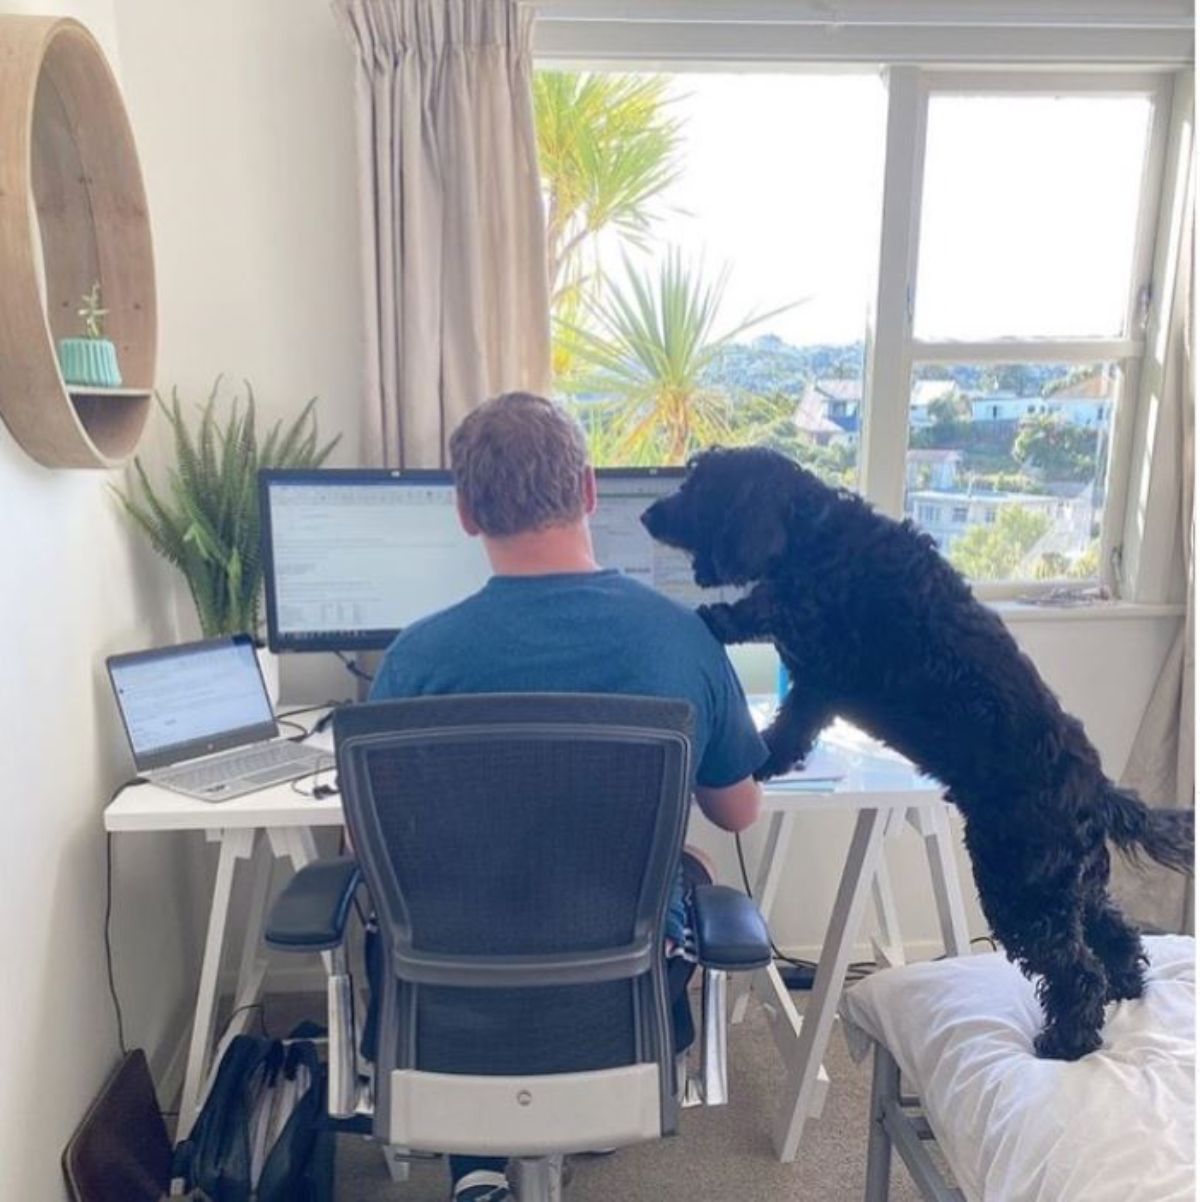 fluffy black dog peeking at computers on a table where a man is seated and working